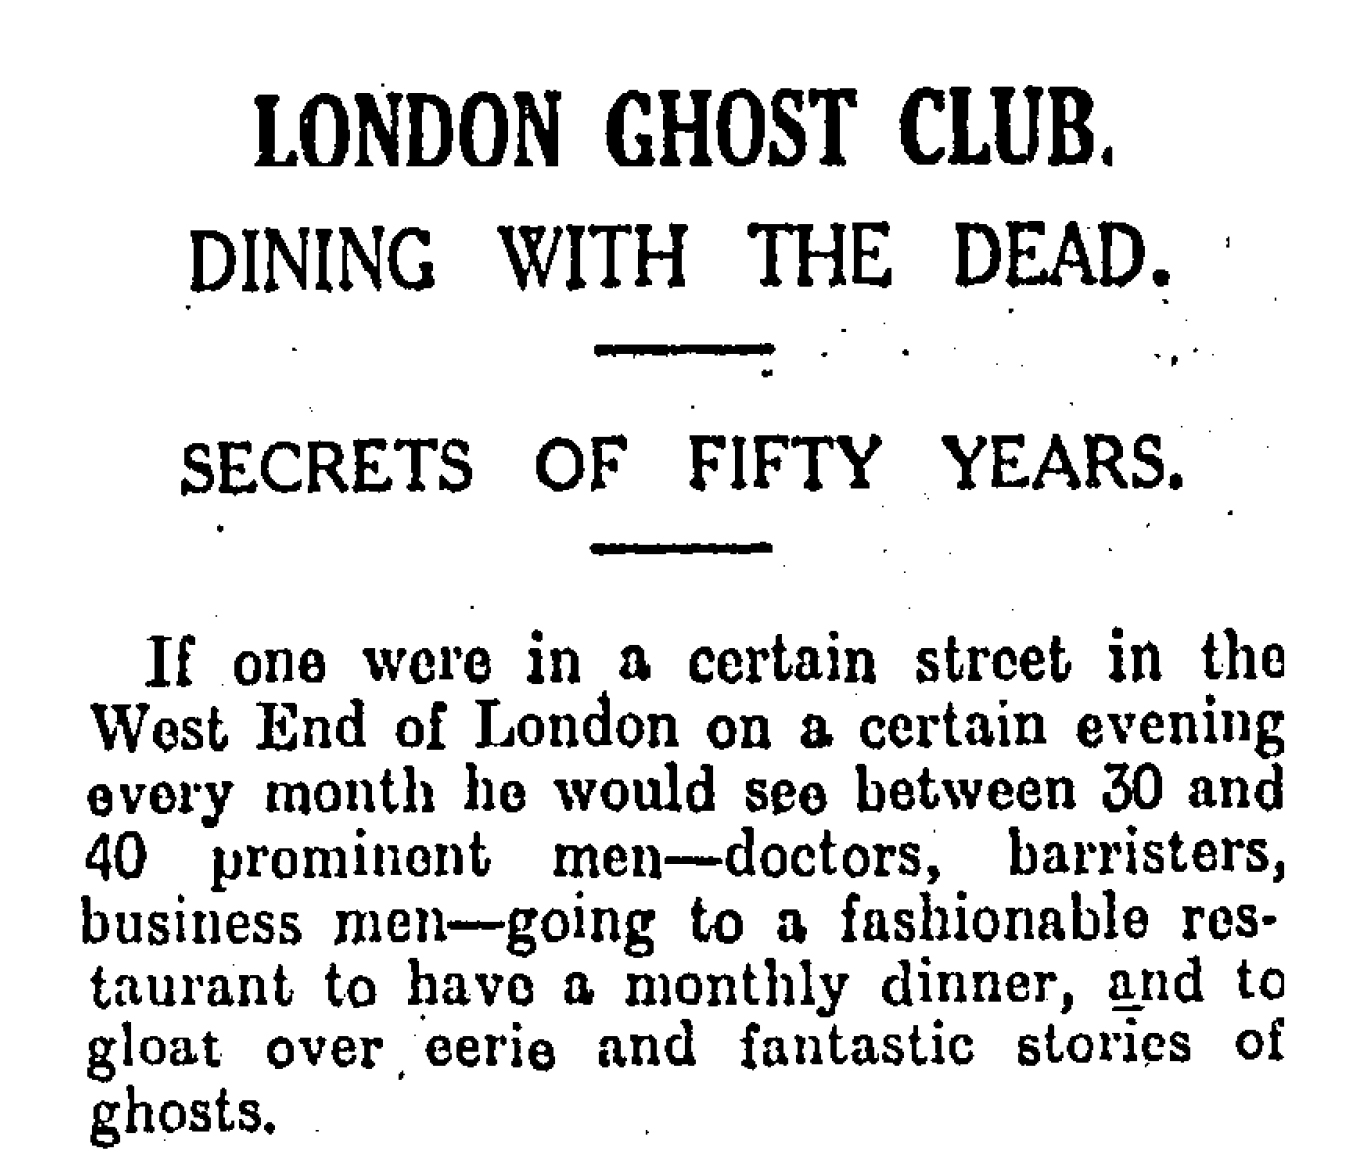 News of the London Ghost Club, reported in the New Zealand Herald, May 23, 1931.